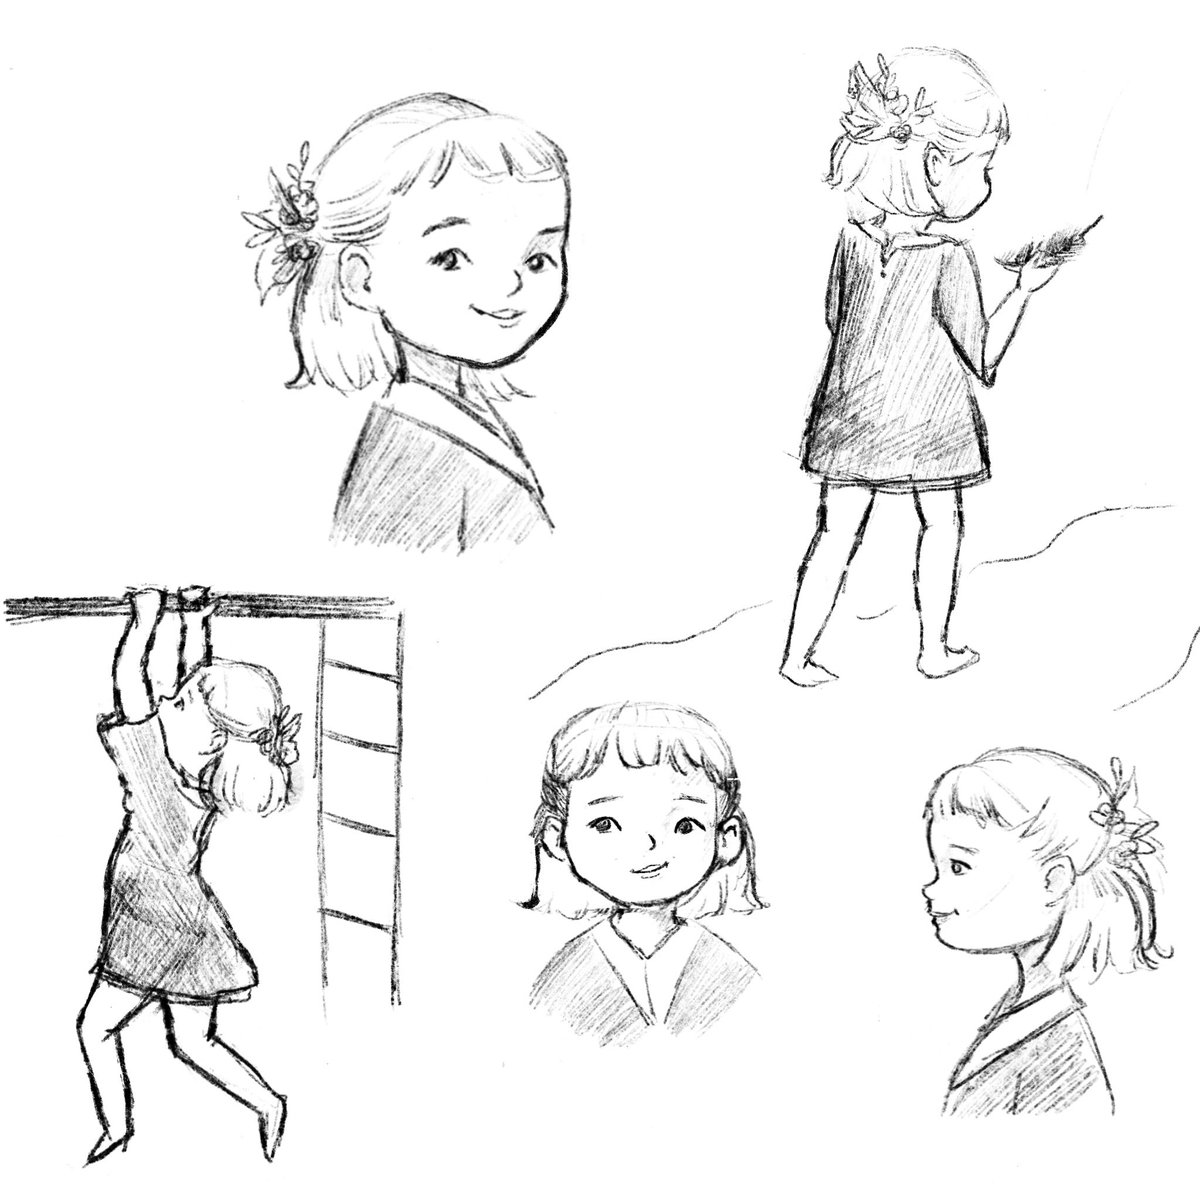 Late night character sketches. #kidlitart #charactersketches